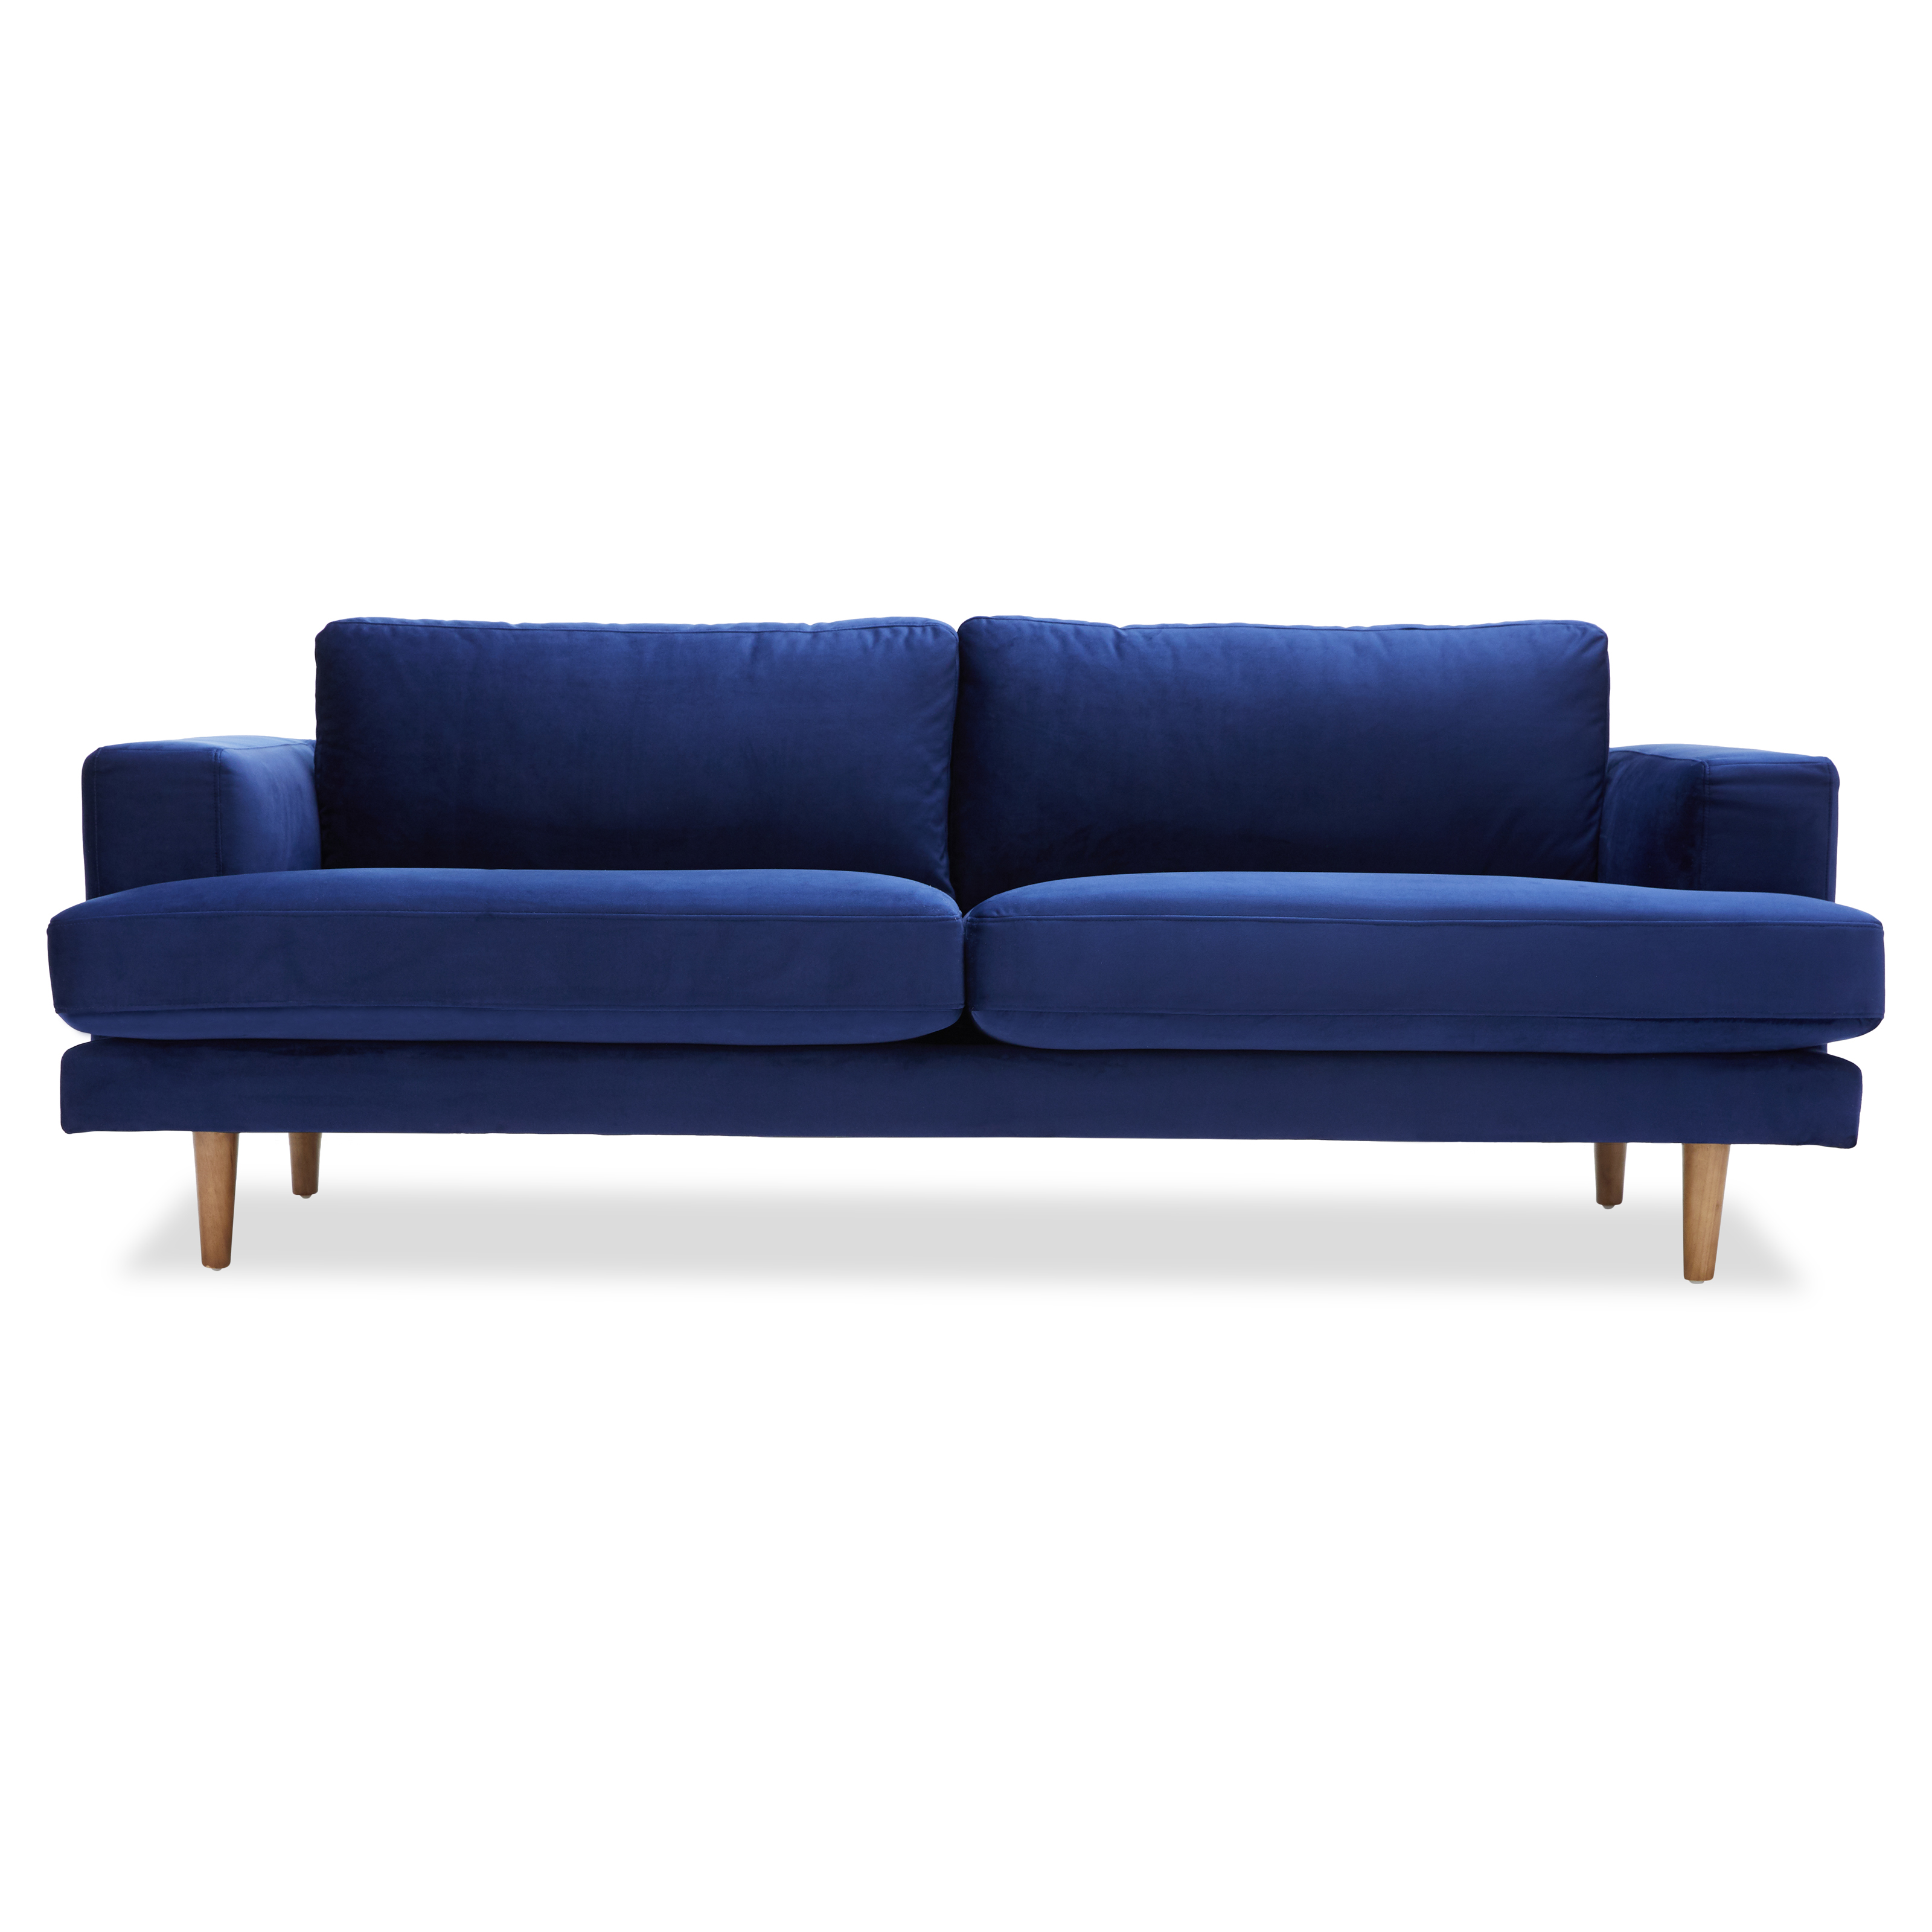 Drew Barrymore Flower Home Sofa, Multiple Colors - image 1 of 12